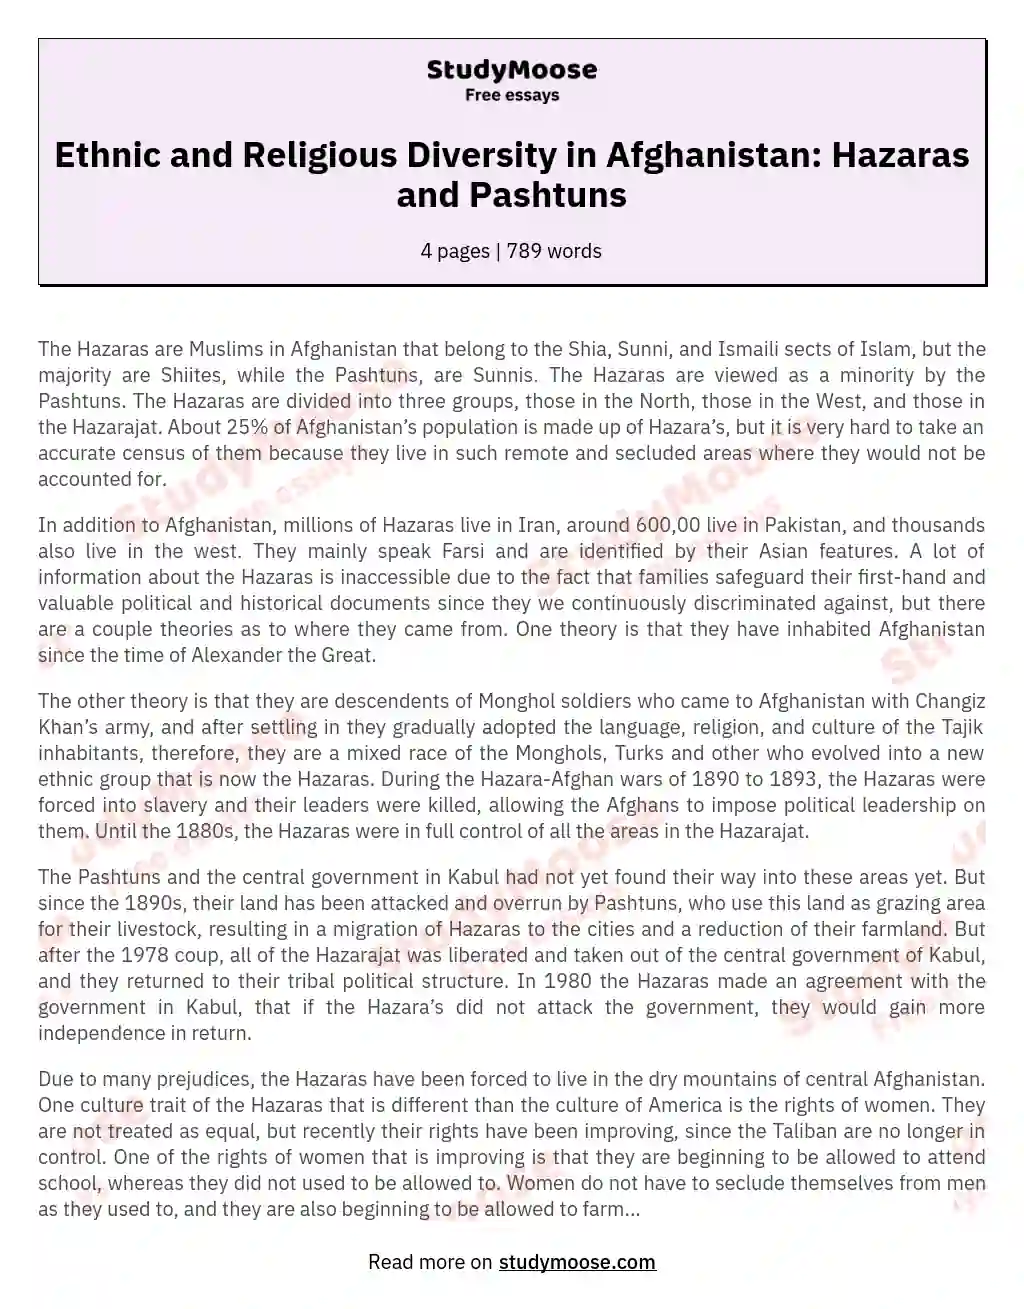 Ethnic and Religious Diversity in Afghanistan: Hazaras and Pashtuns essay